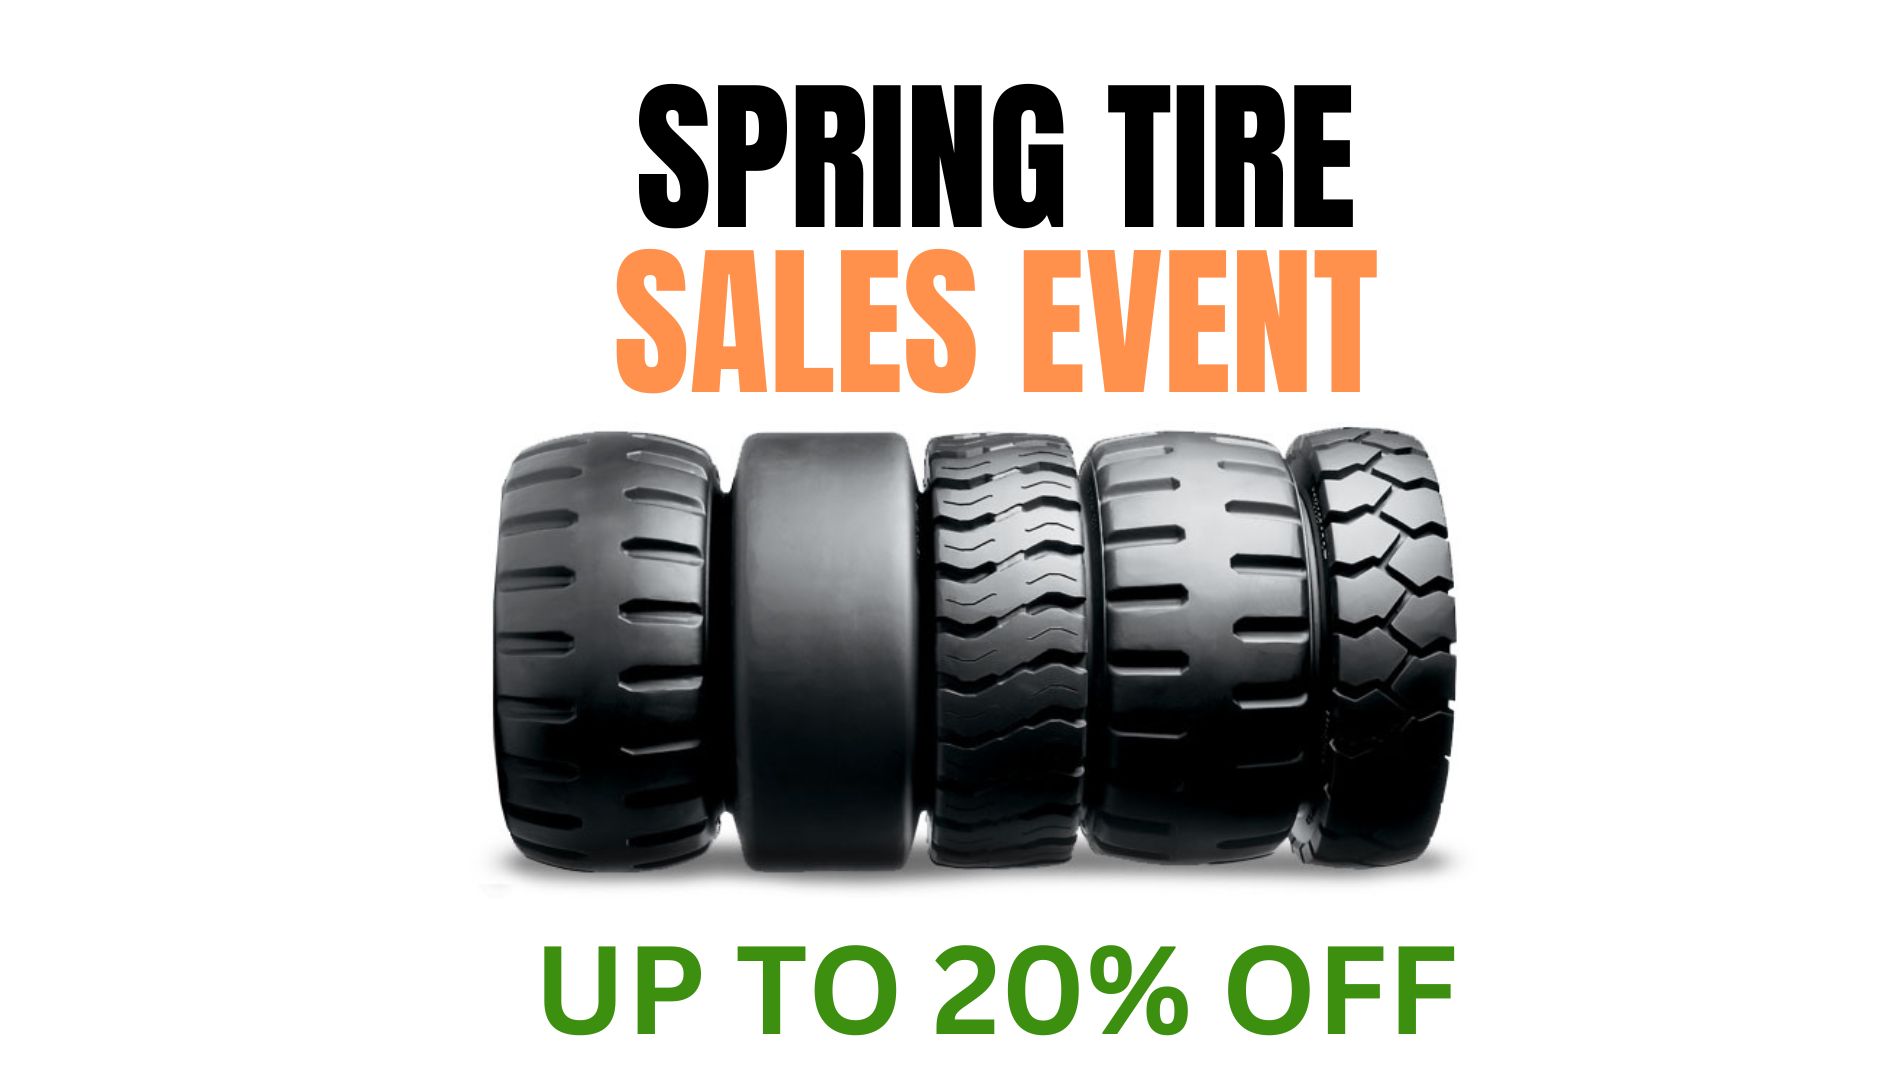 Blog post - Spring Tire Sales Event